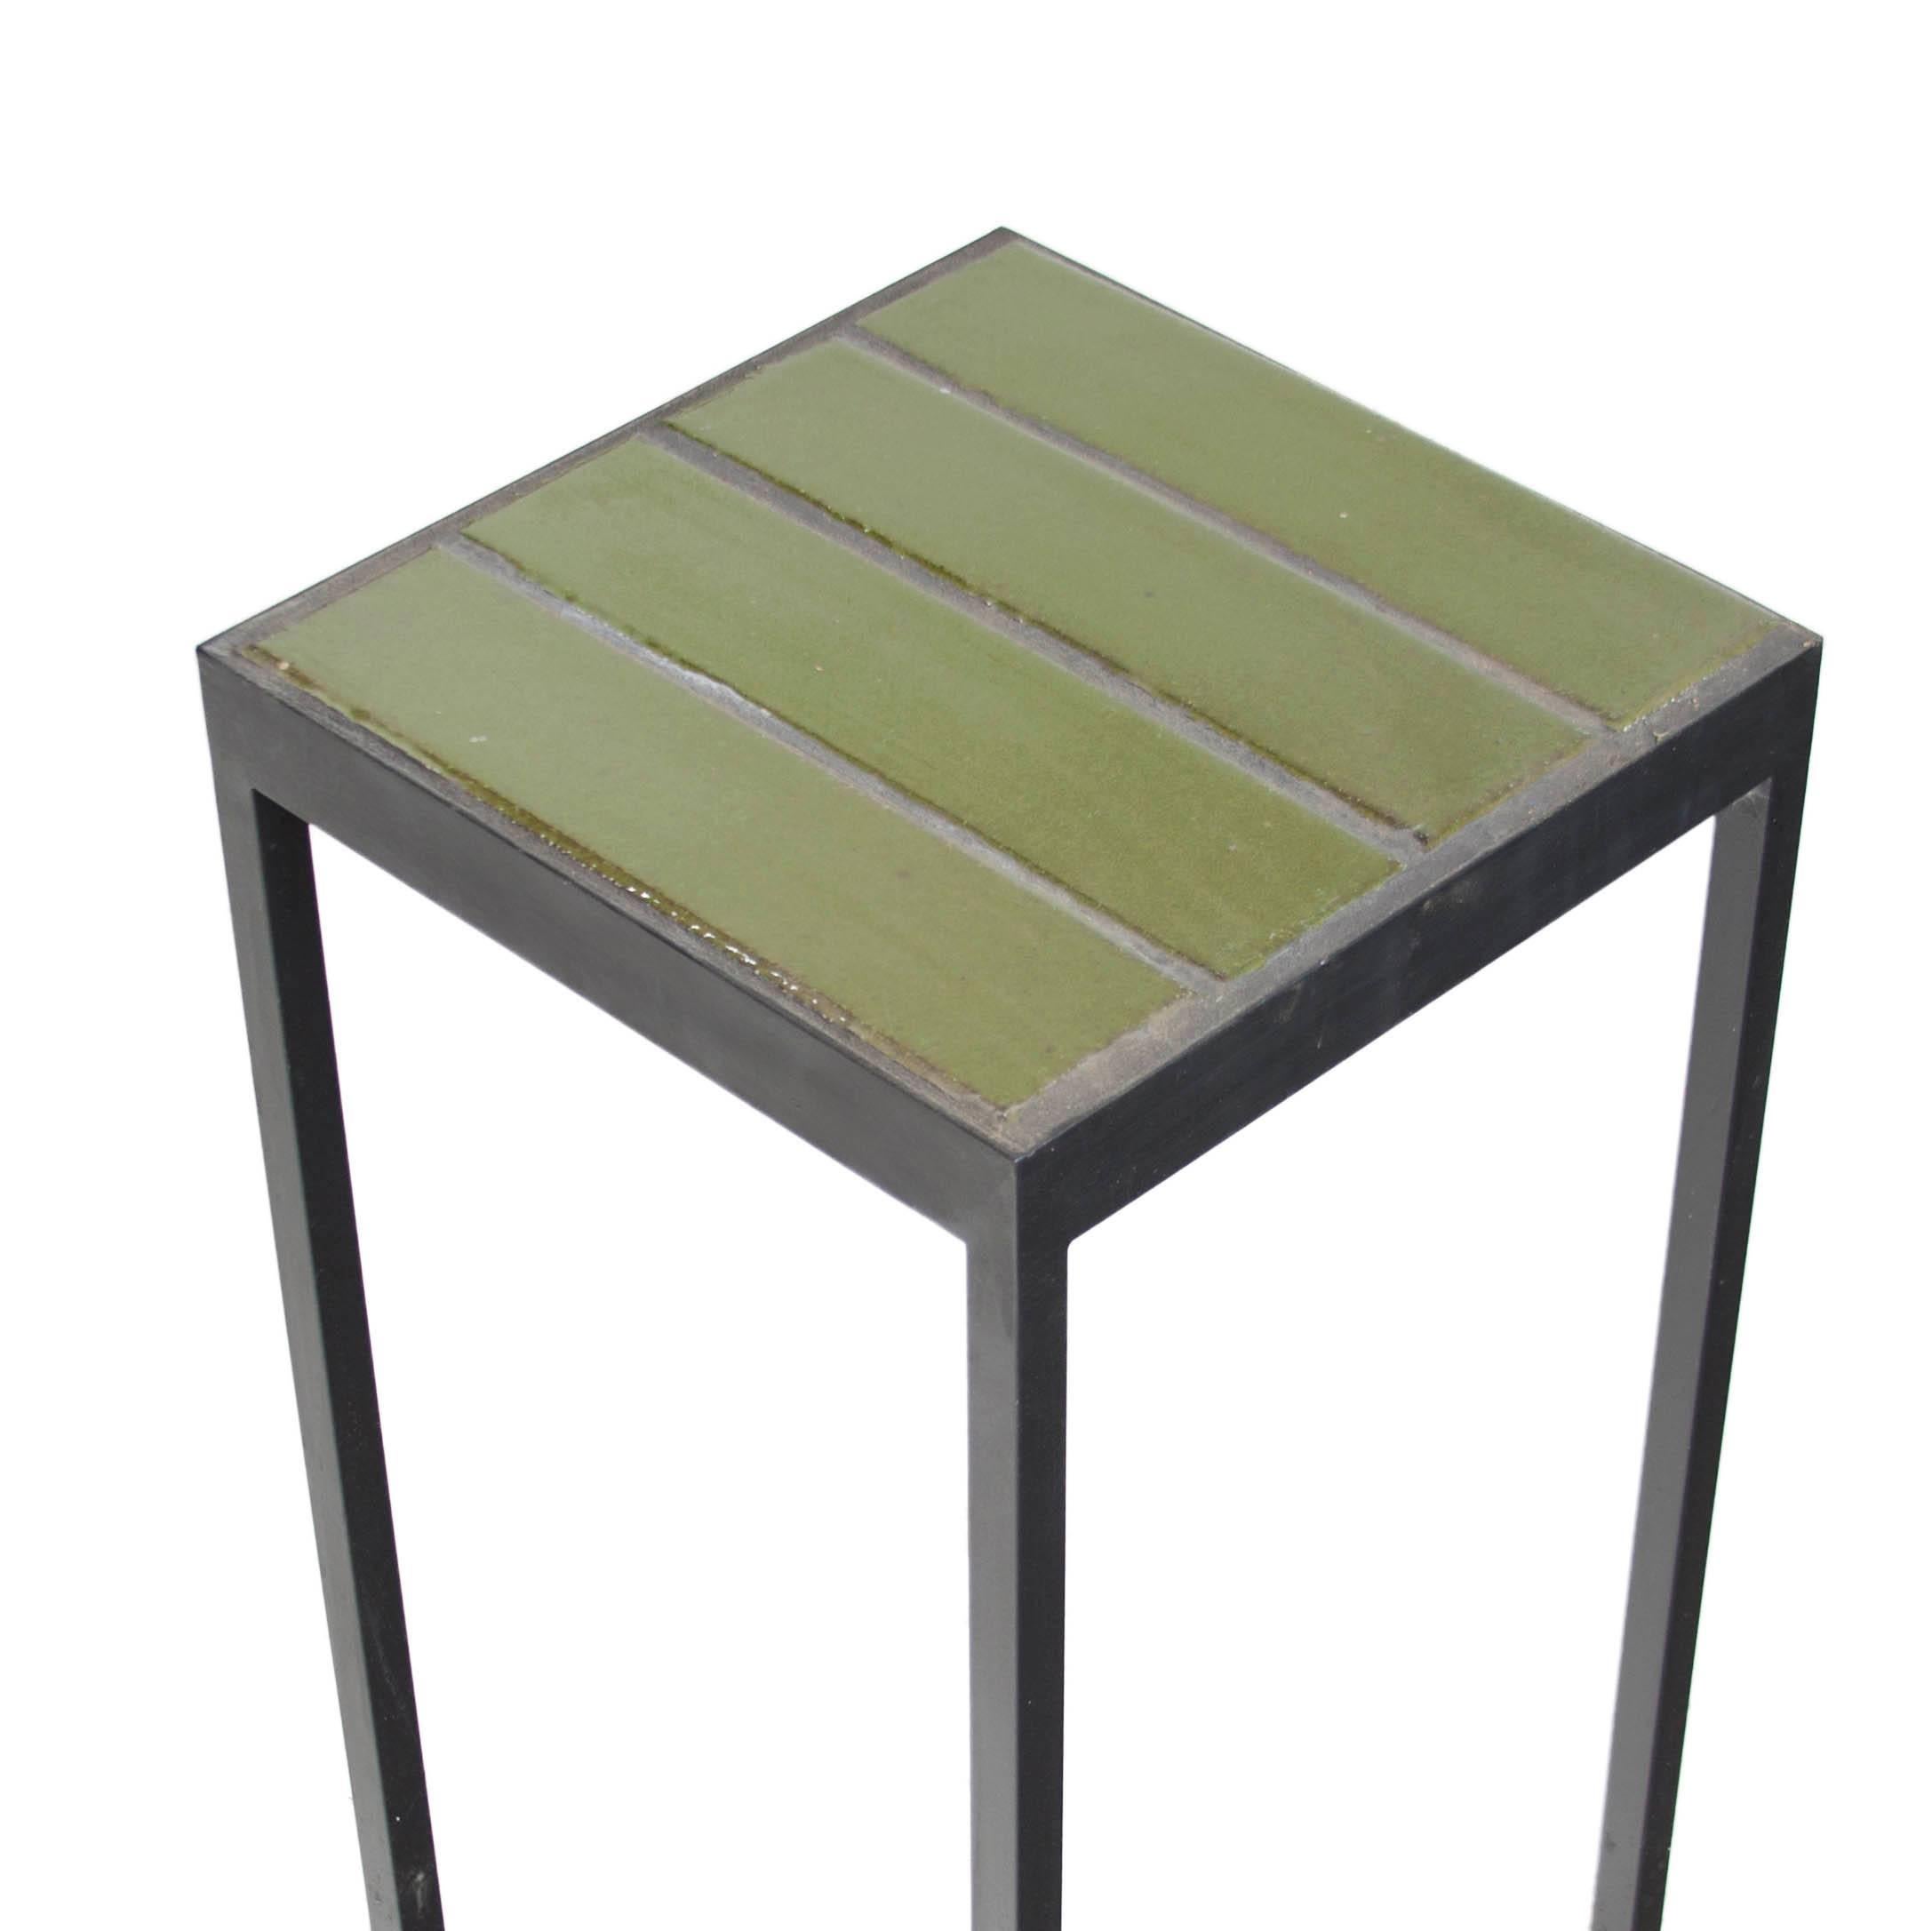 This collection of handcrafted tile side tables by Thomas Hayes Studio are made from a collection of vintage tiles and powder coated steel bases. These unique pieces are perfect for both indoor and outdoor use, in pairs or as standalone pieces, they